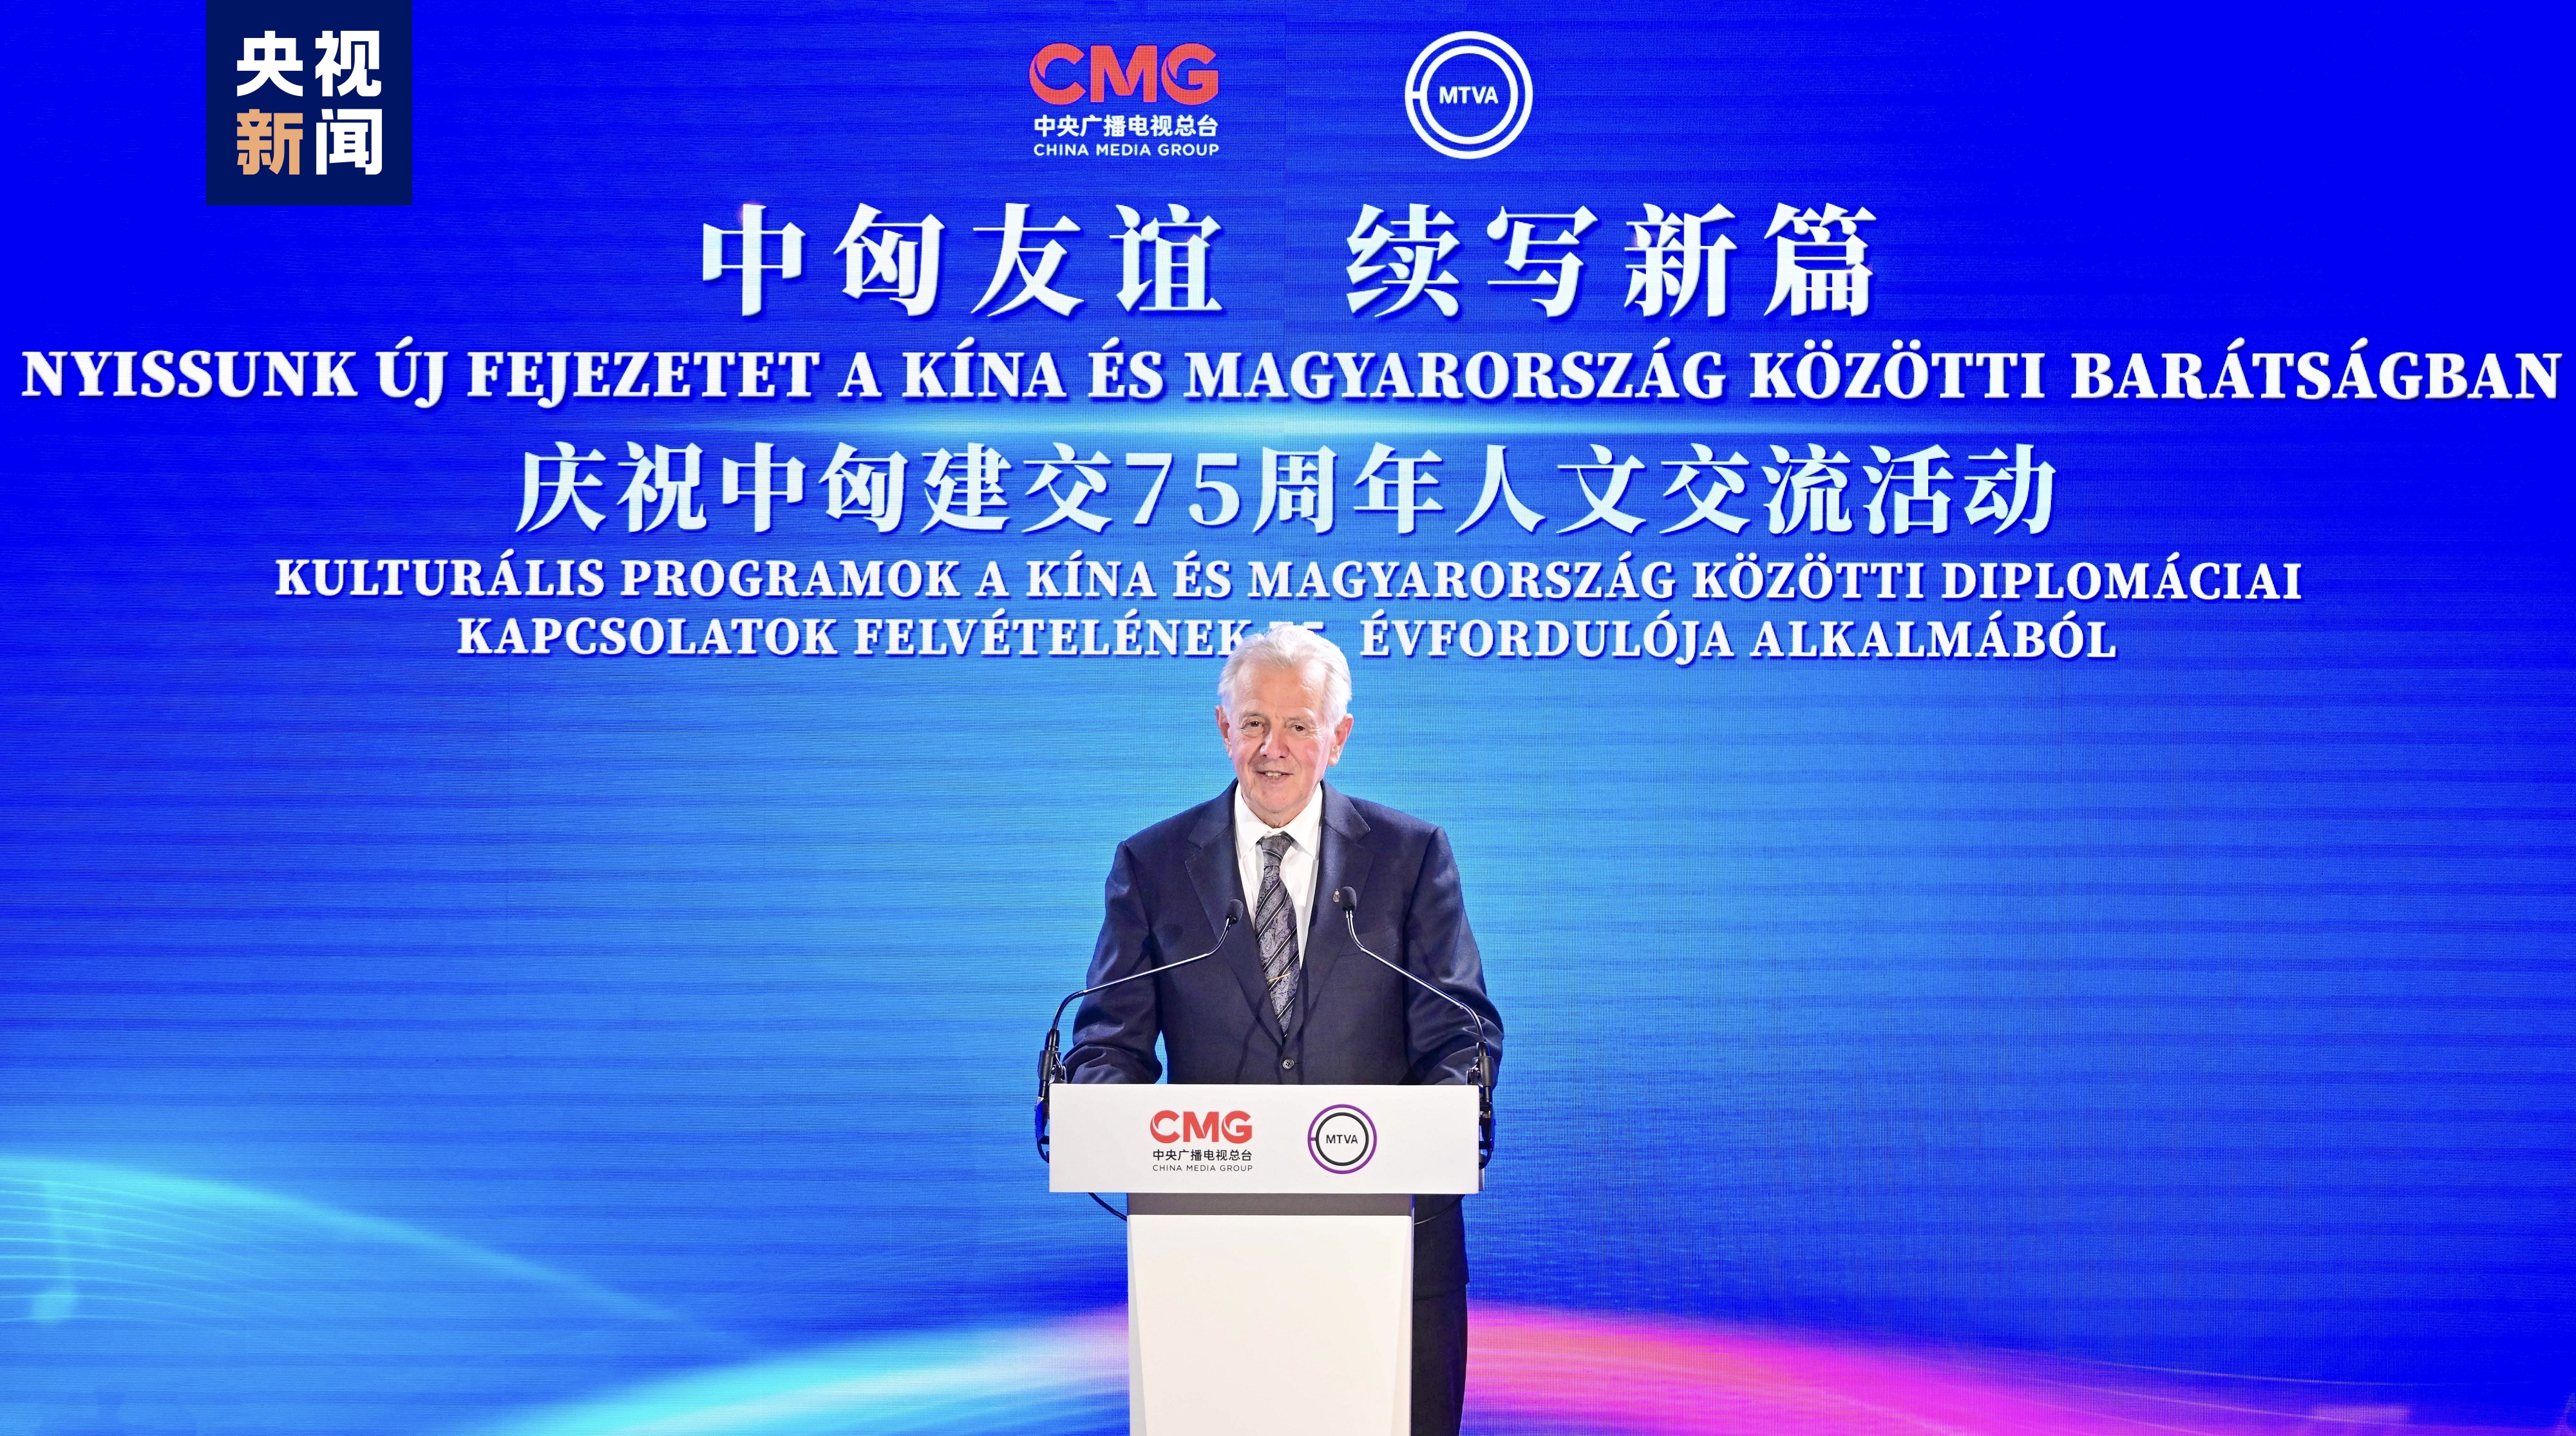 Former Hungarian President Pal Schmitt speaks at the opening ceremony of CMG's show 